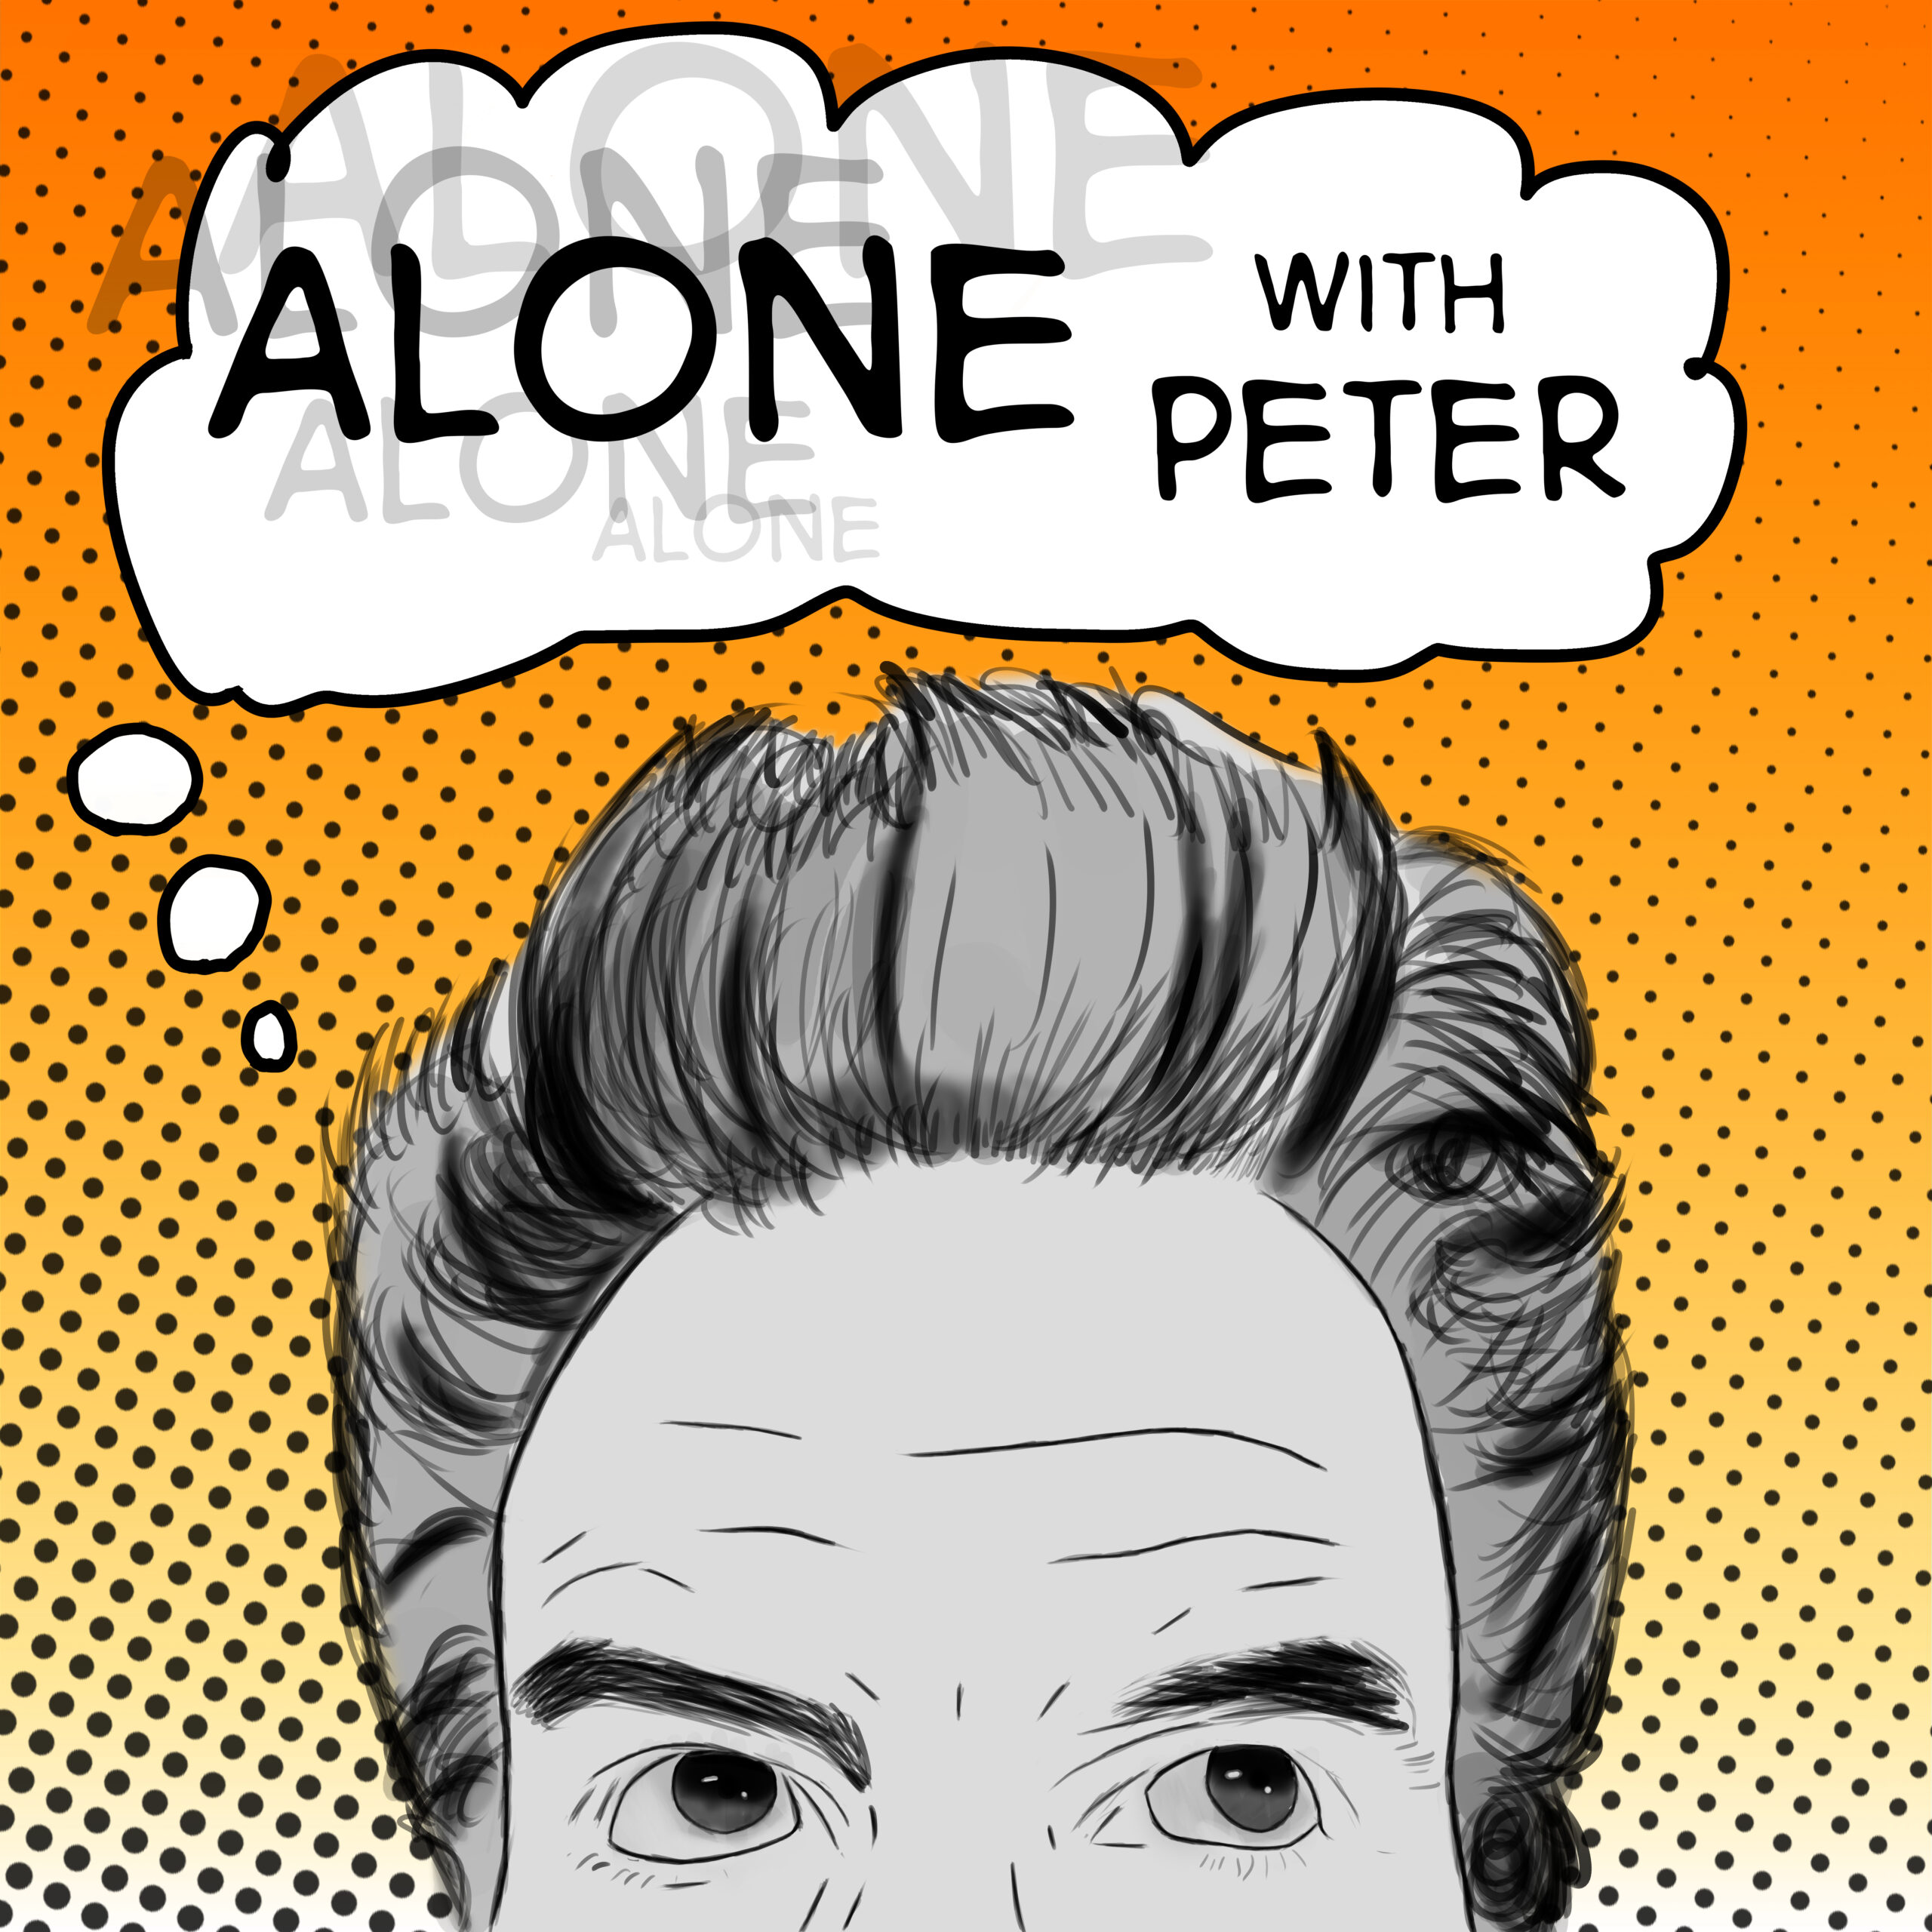 1 Alone with Peter?